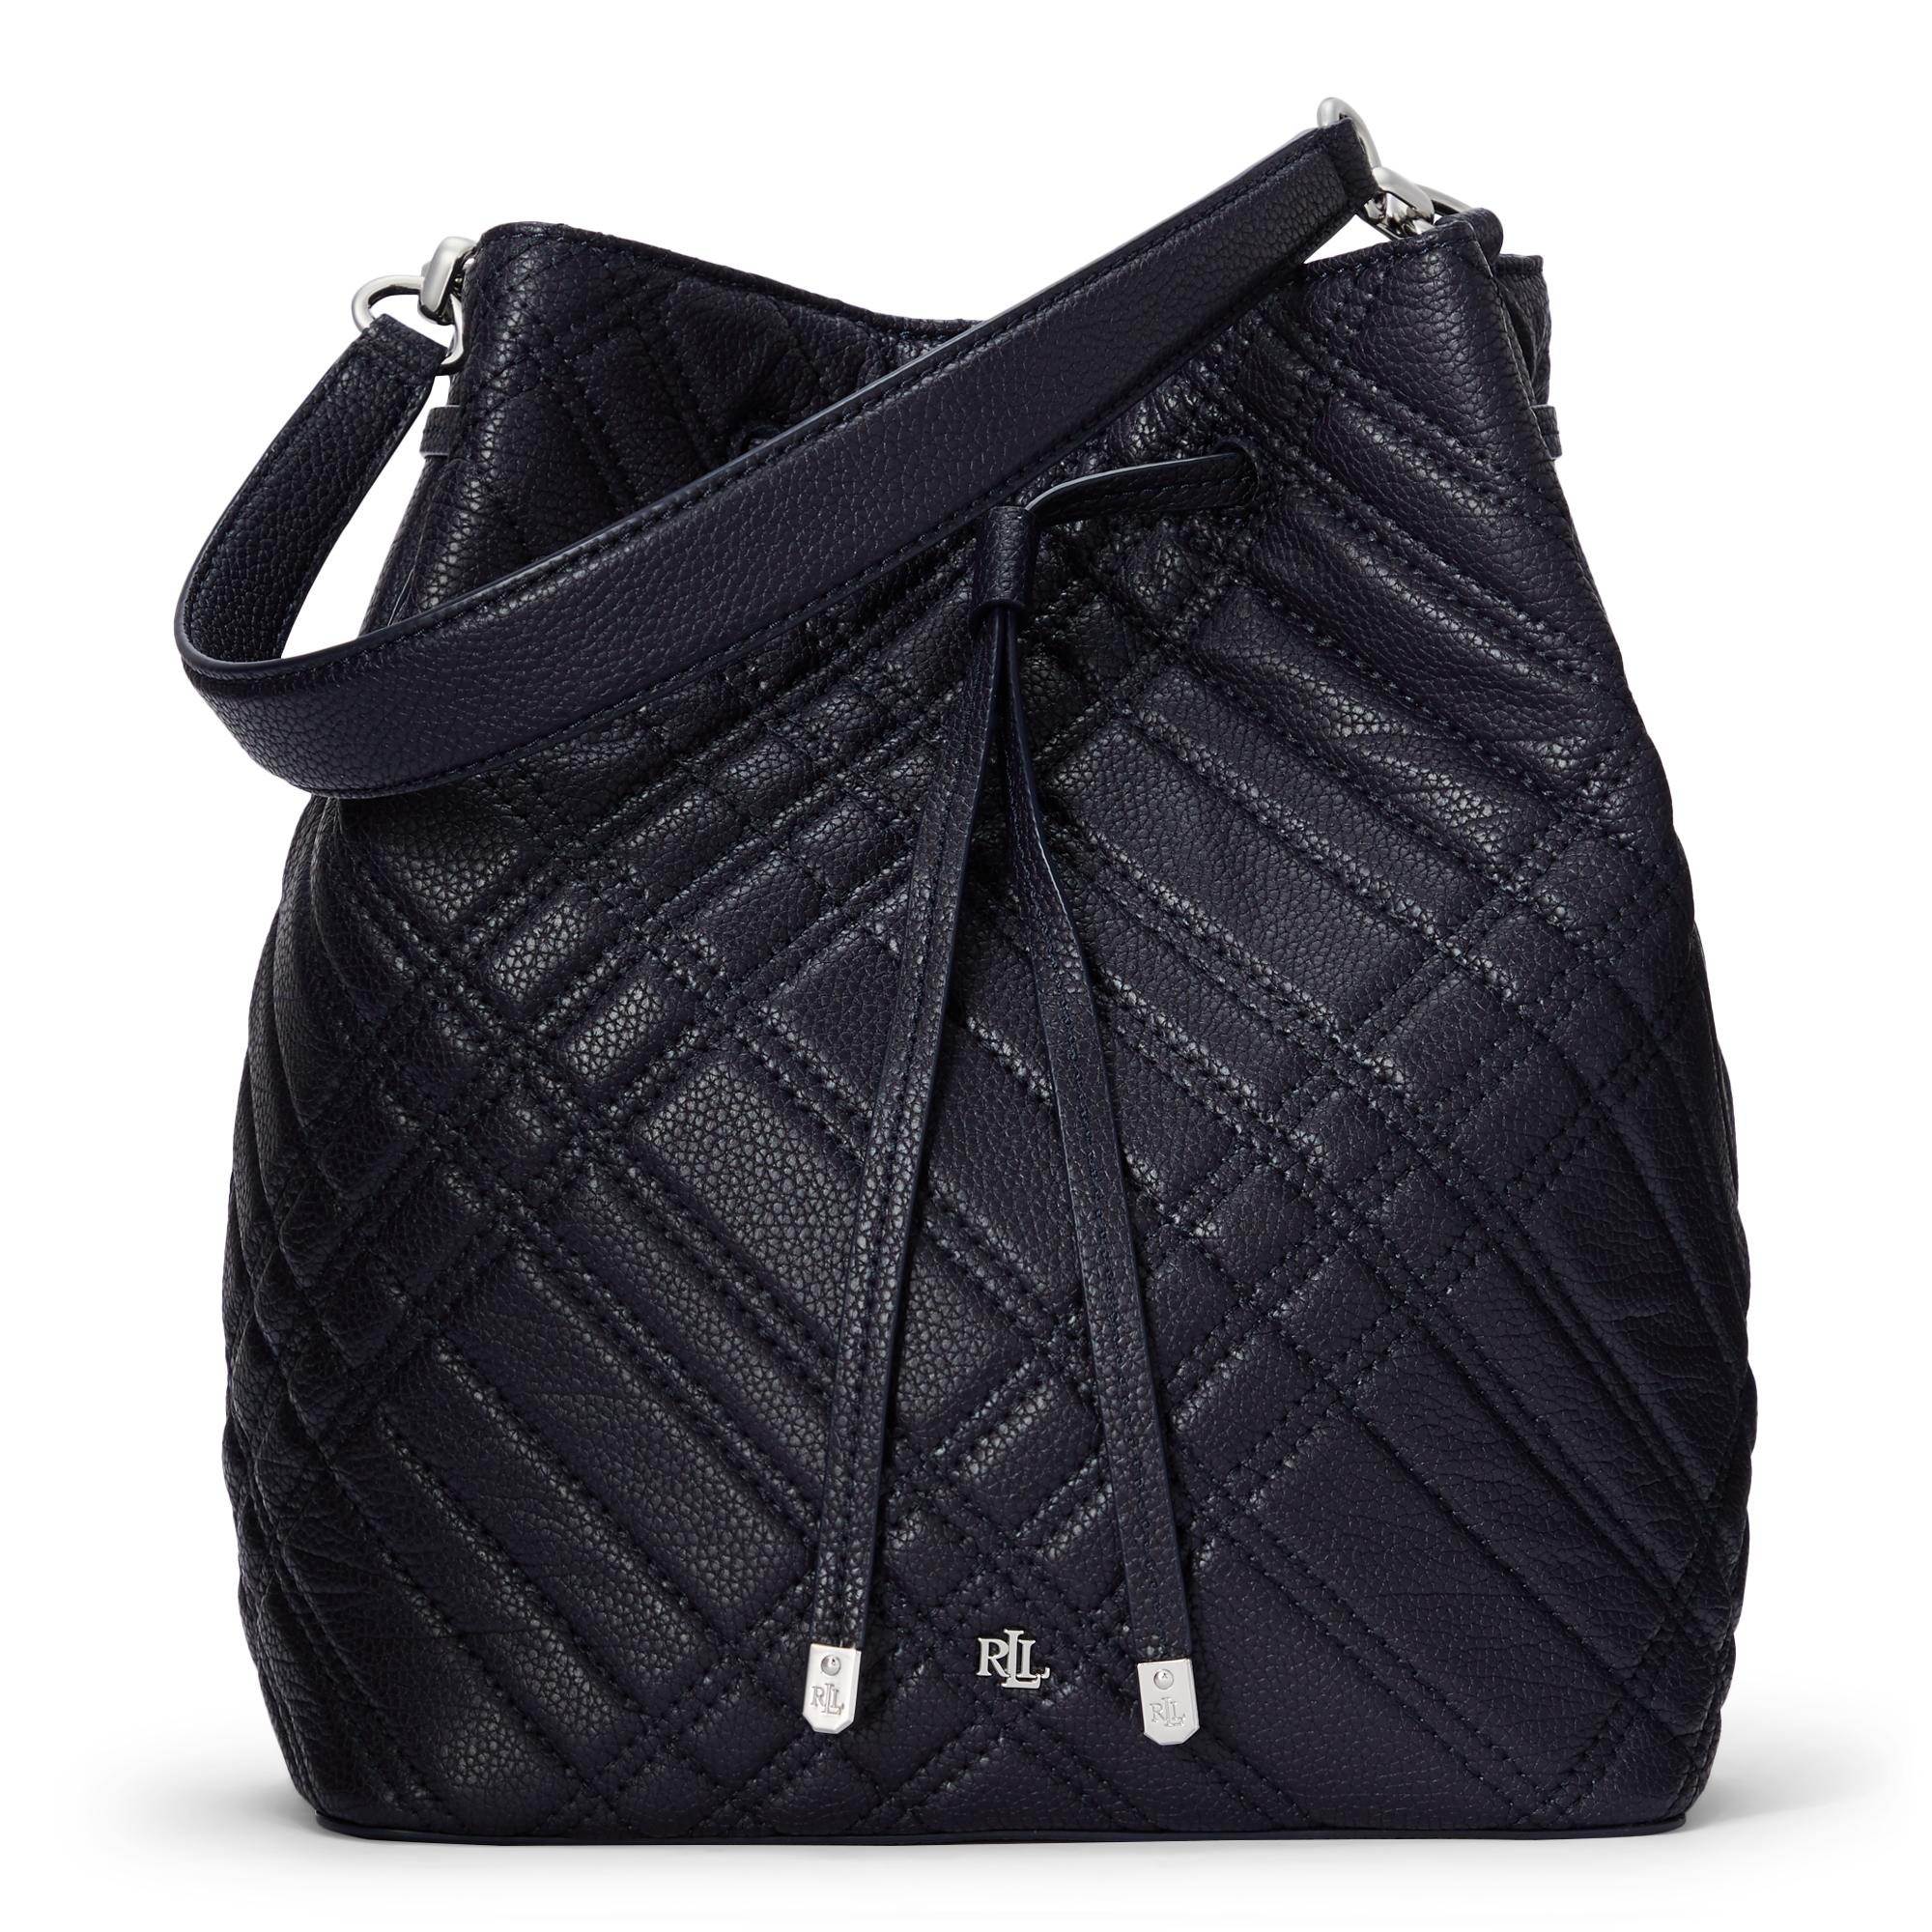 analog stay embroidery Ralph Lauren Ralph Lauren Plaid Quilted Debby Drawstring Bag in Blue | Lyst